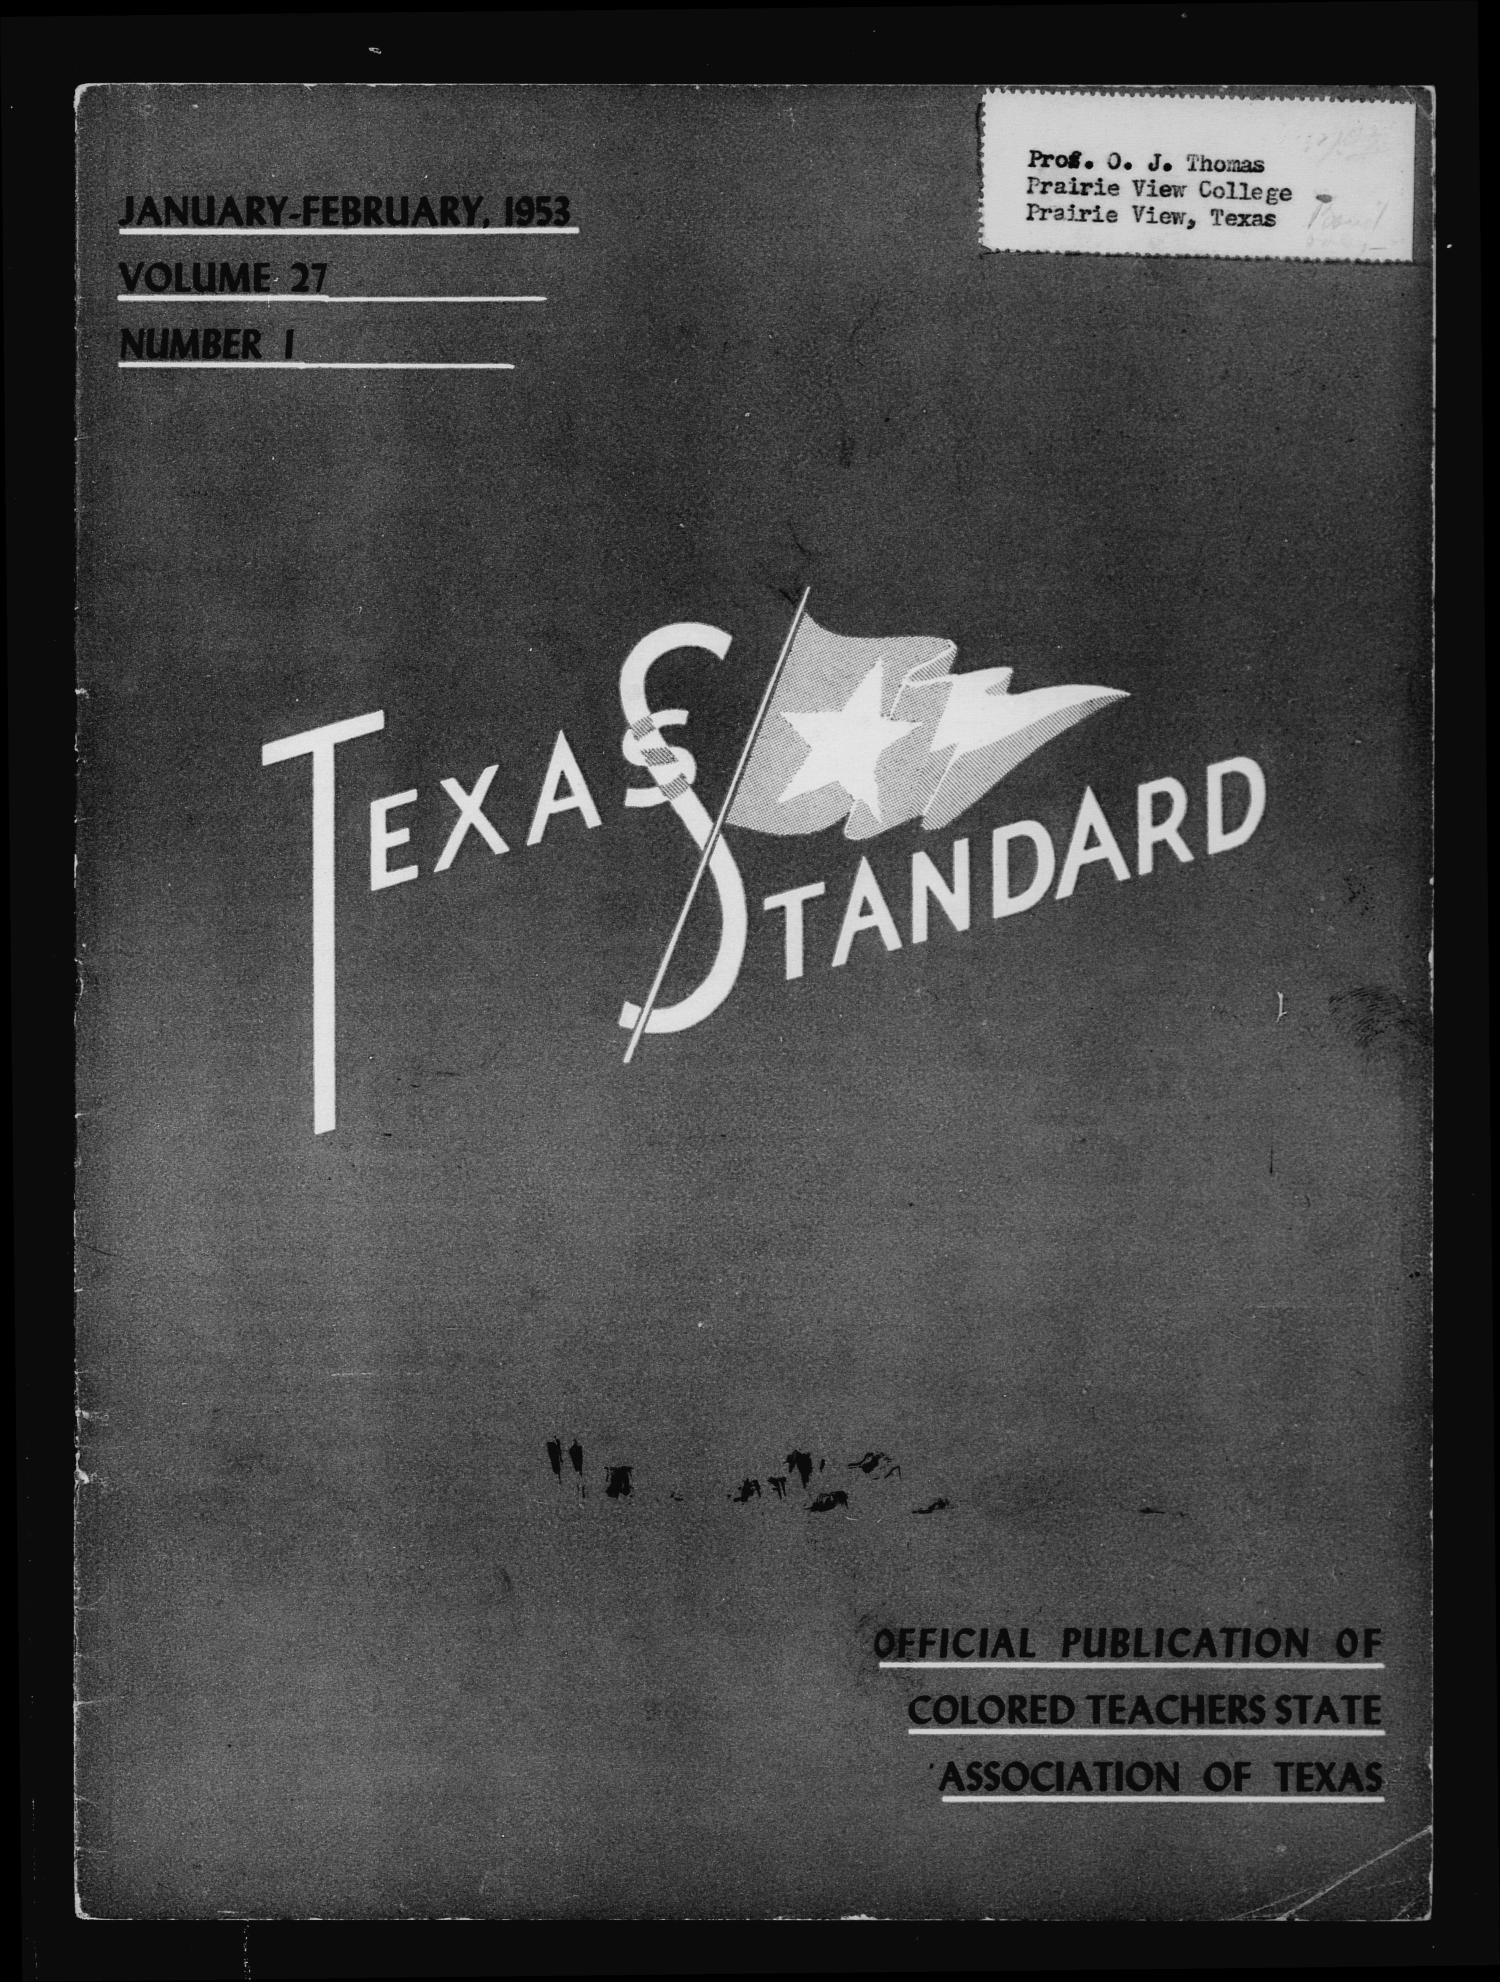 The Texas Standard, Volume 27, Number 1, January-February 1953
                                                
                                                    Front Cover
                                                